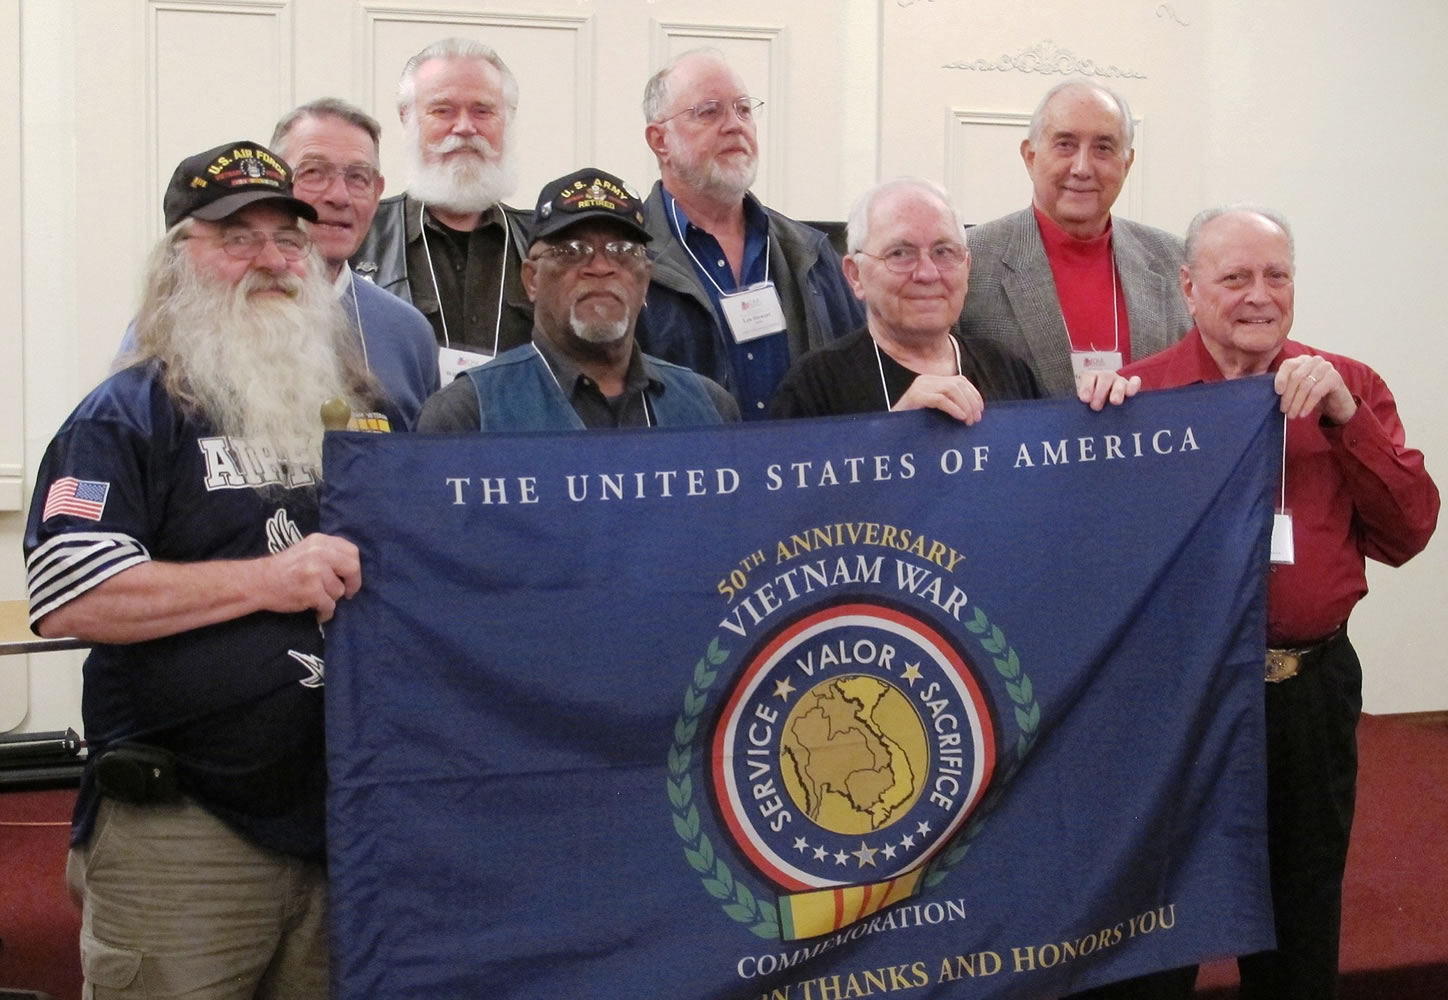 West Minnehaha: The Fort Vancouver Chapter of the Daughters of the American Revolution honored Vietnam veterans at a luncheon on March 10.